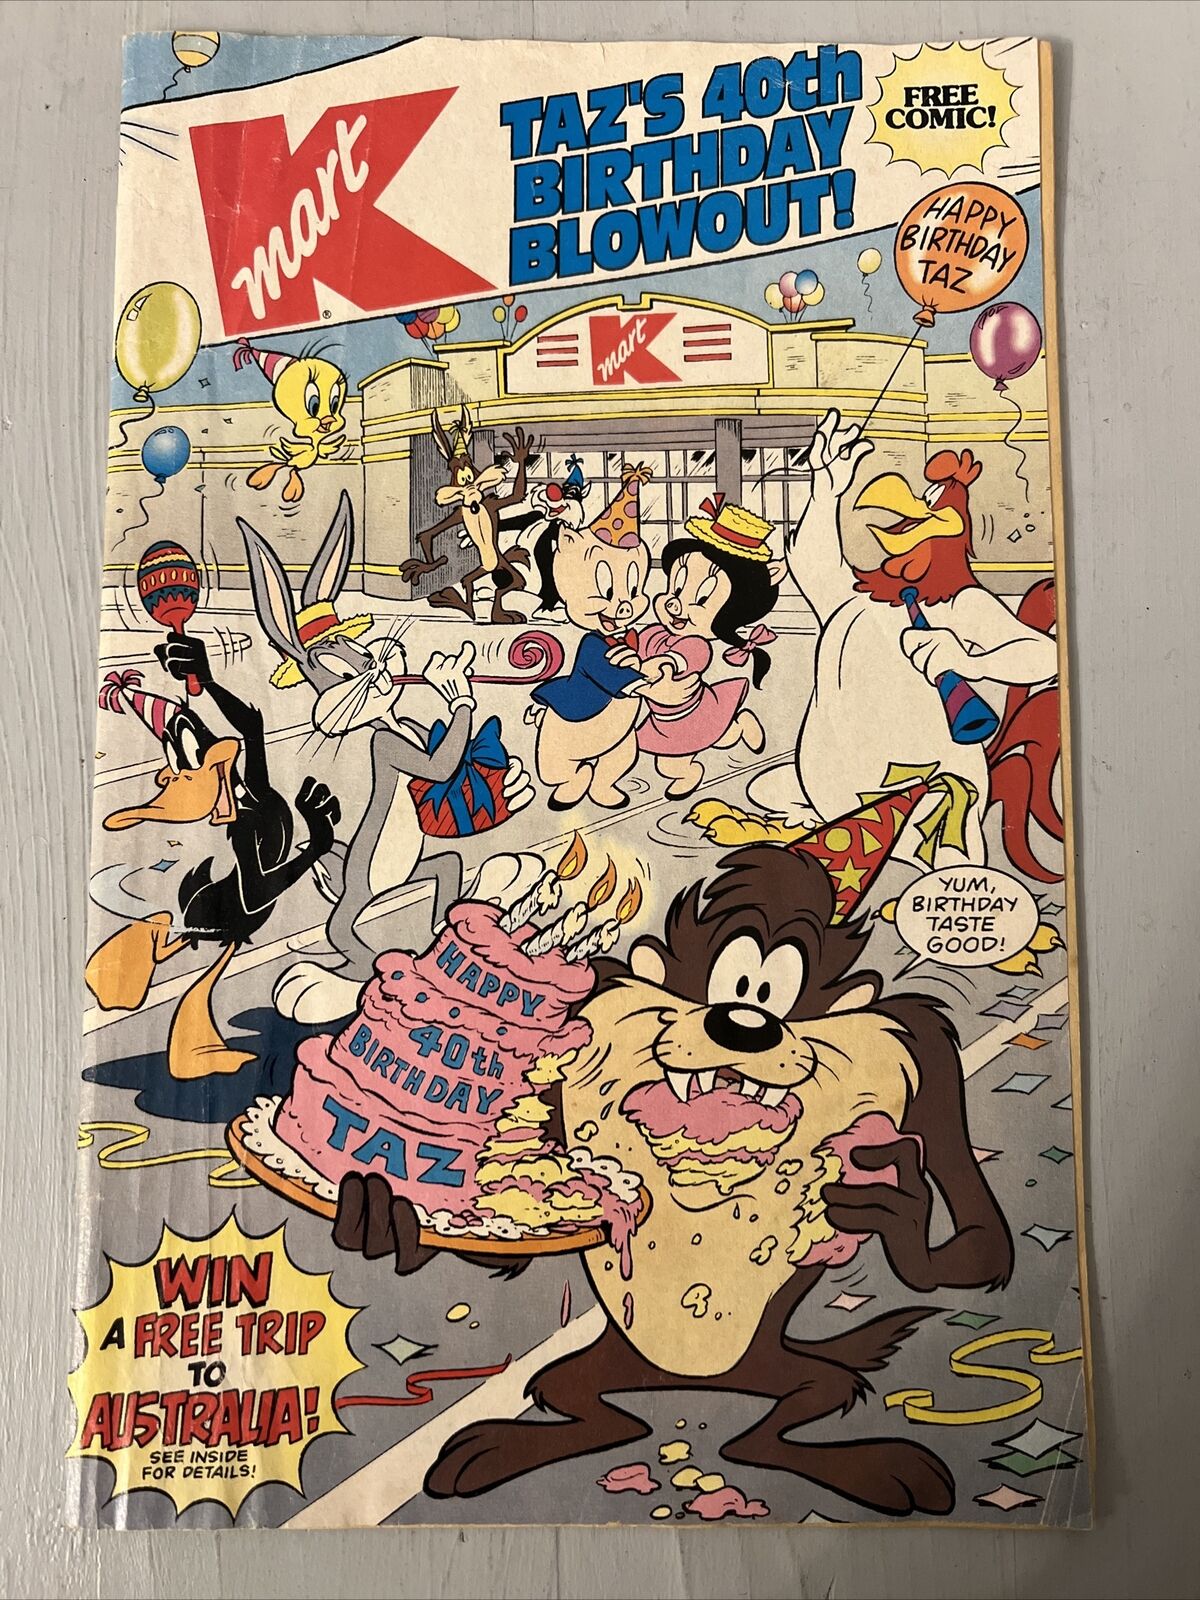 LOONEY TOONS KMART TAZ’S 40TH BIRTHDAH PARTY COMIC BOOK SINGLE ISSUE (PRE-OWNED